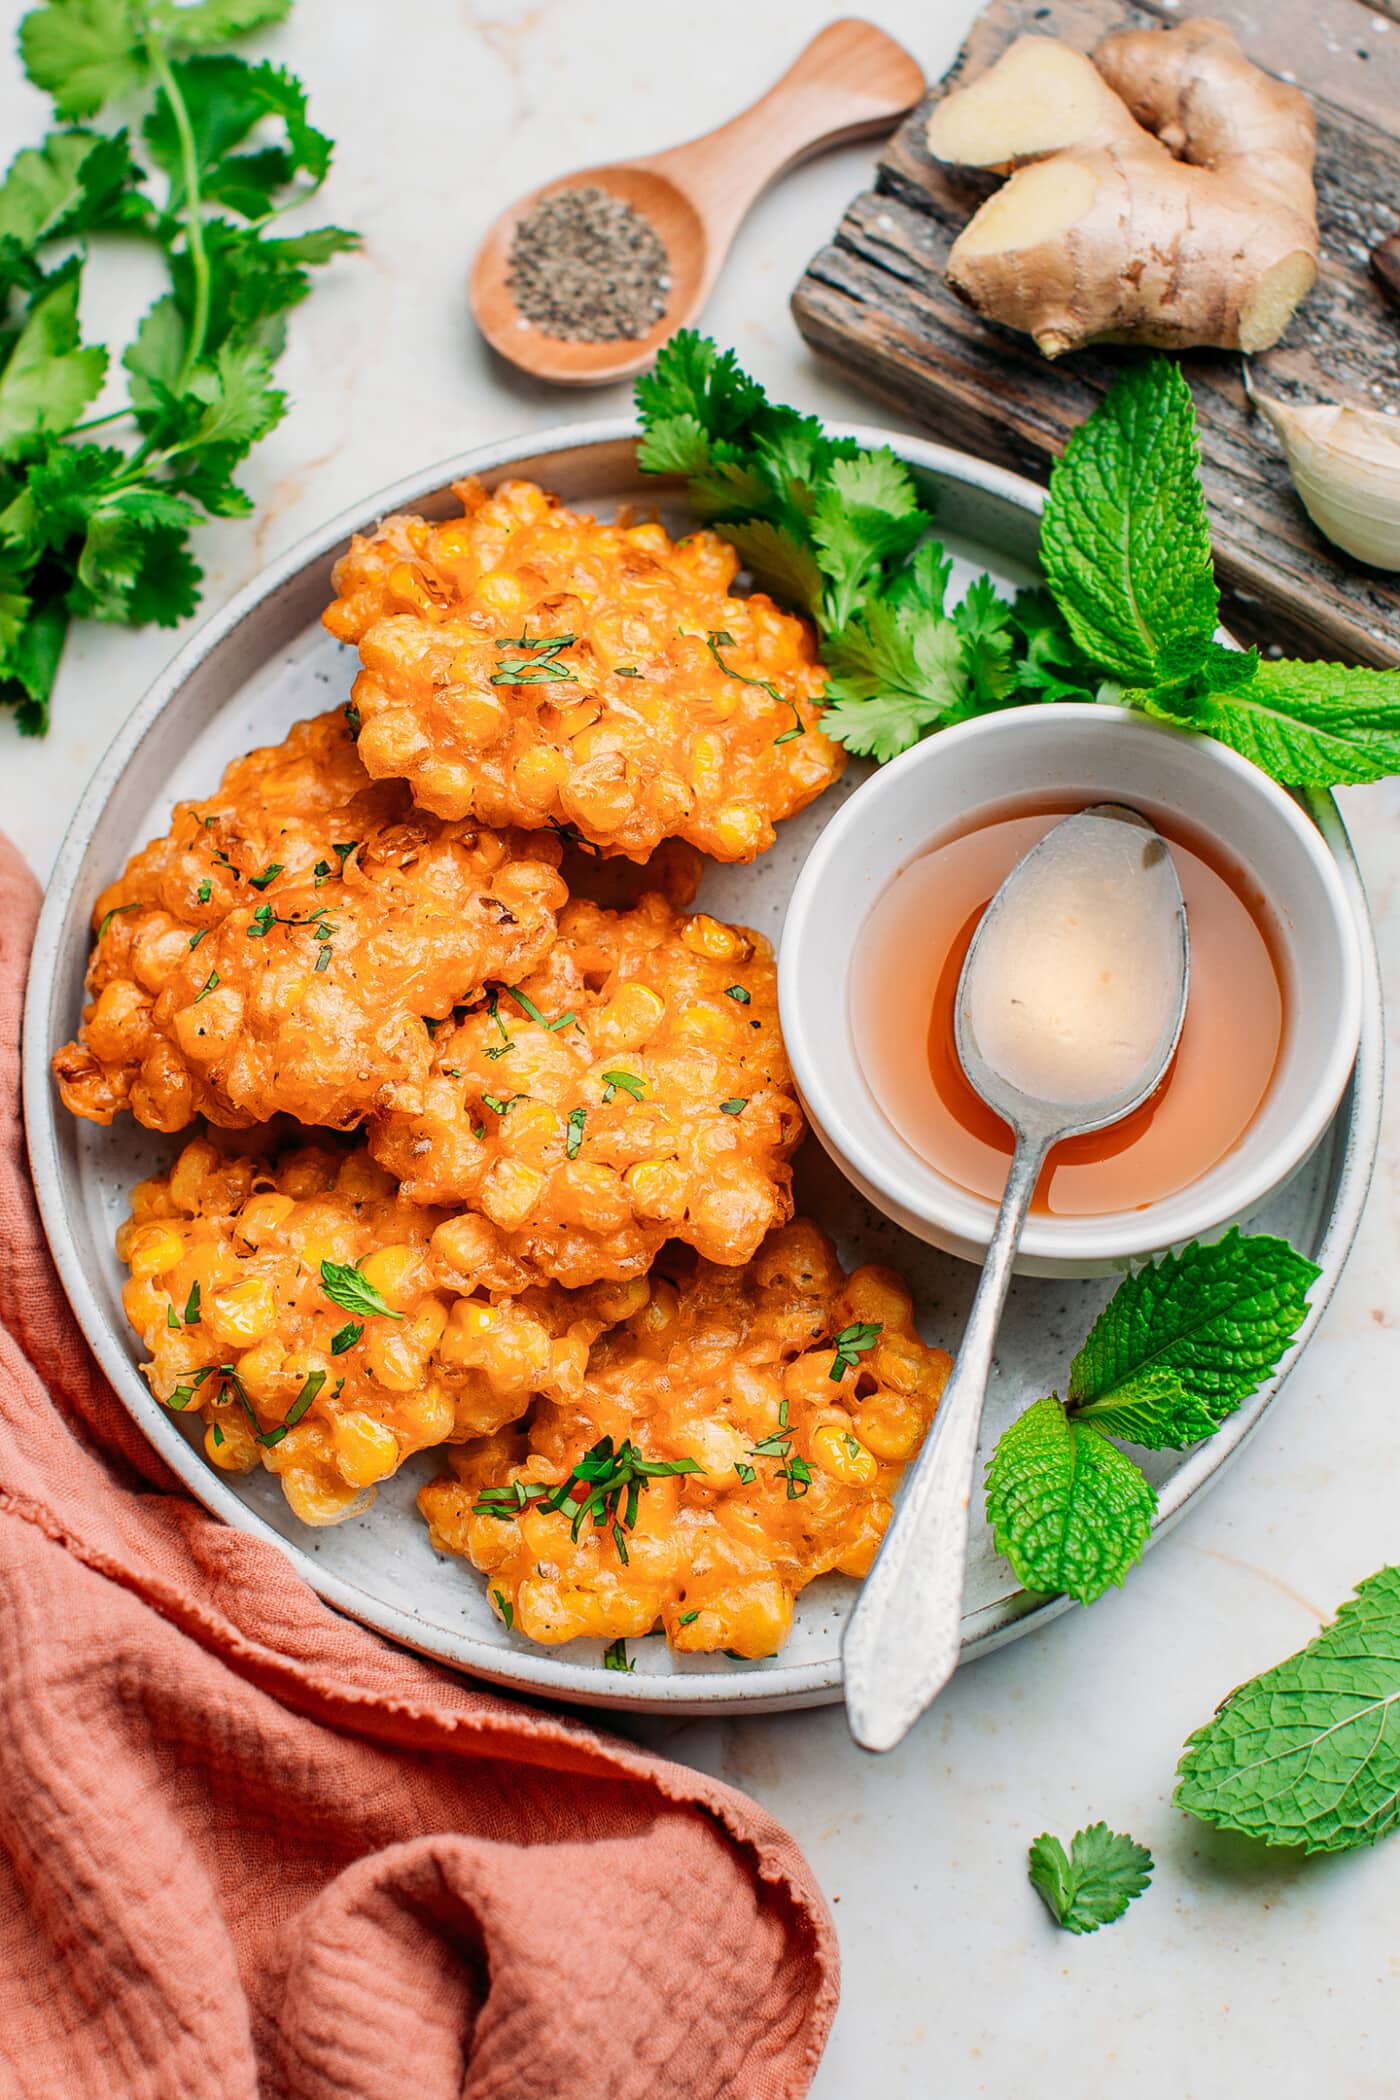 Corn fritters topped with cilantro and mint on a plate.